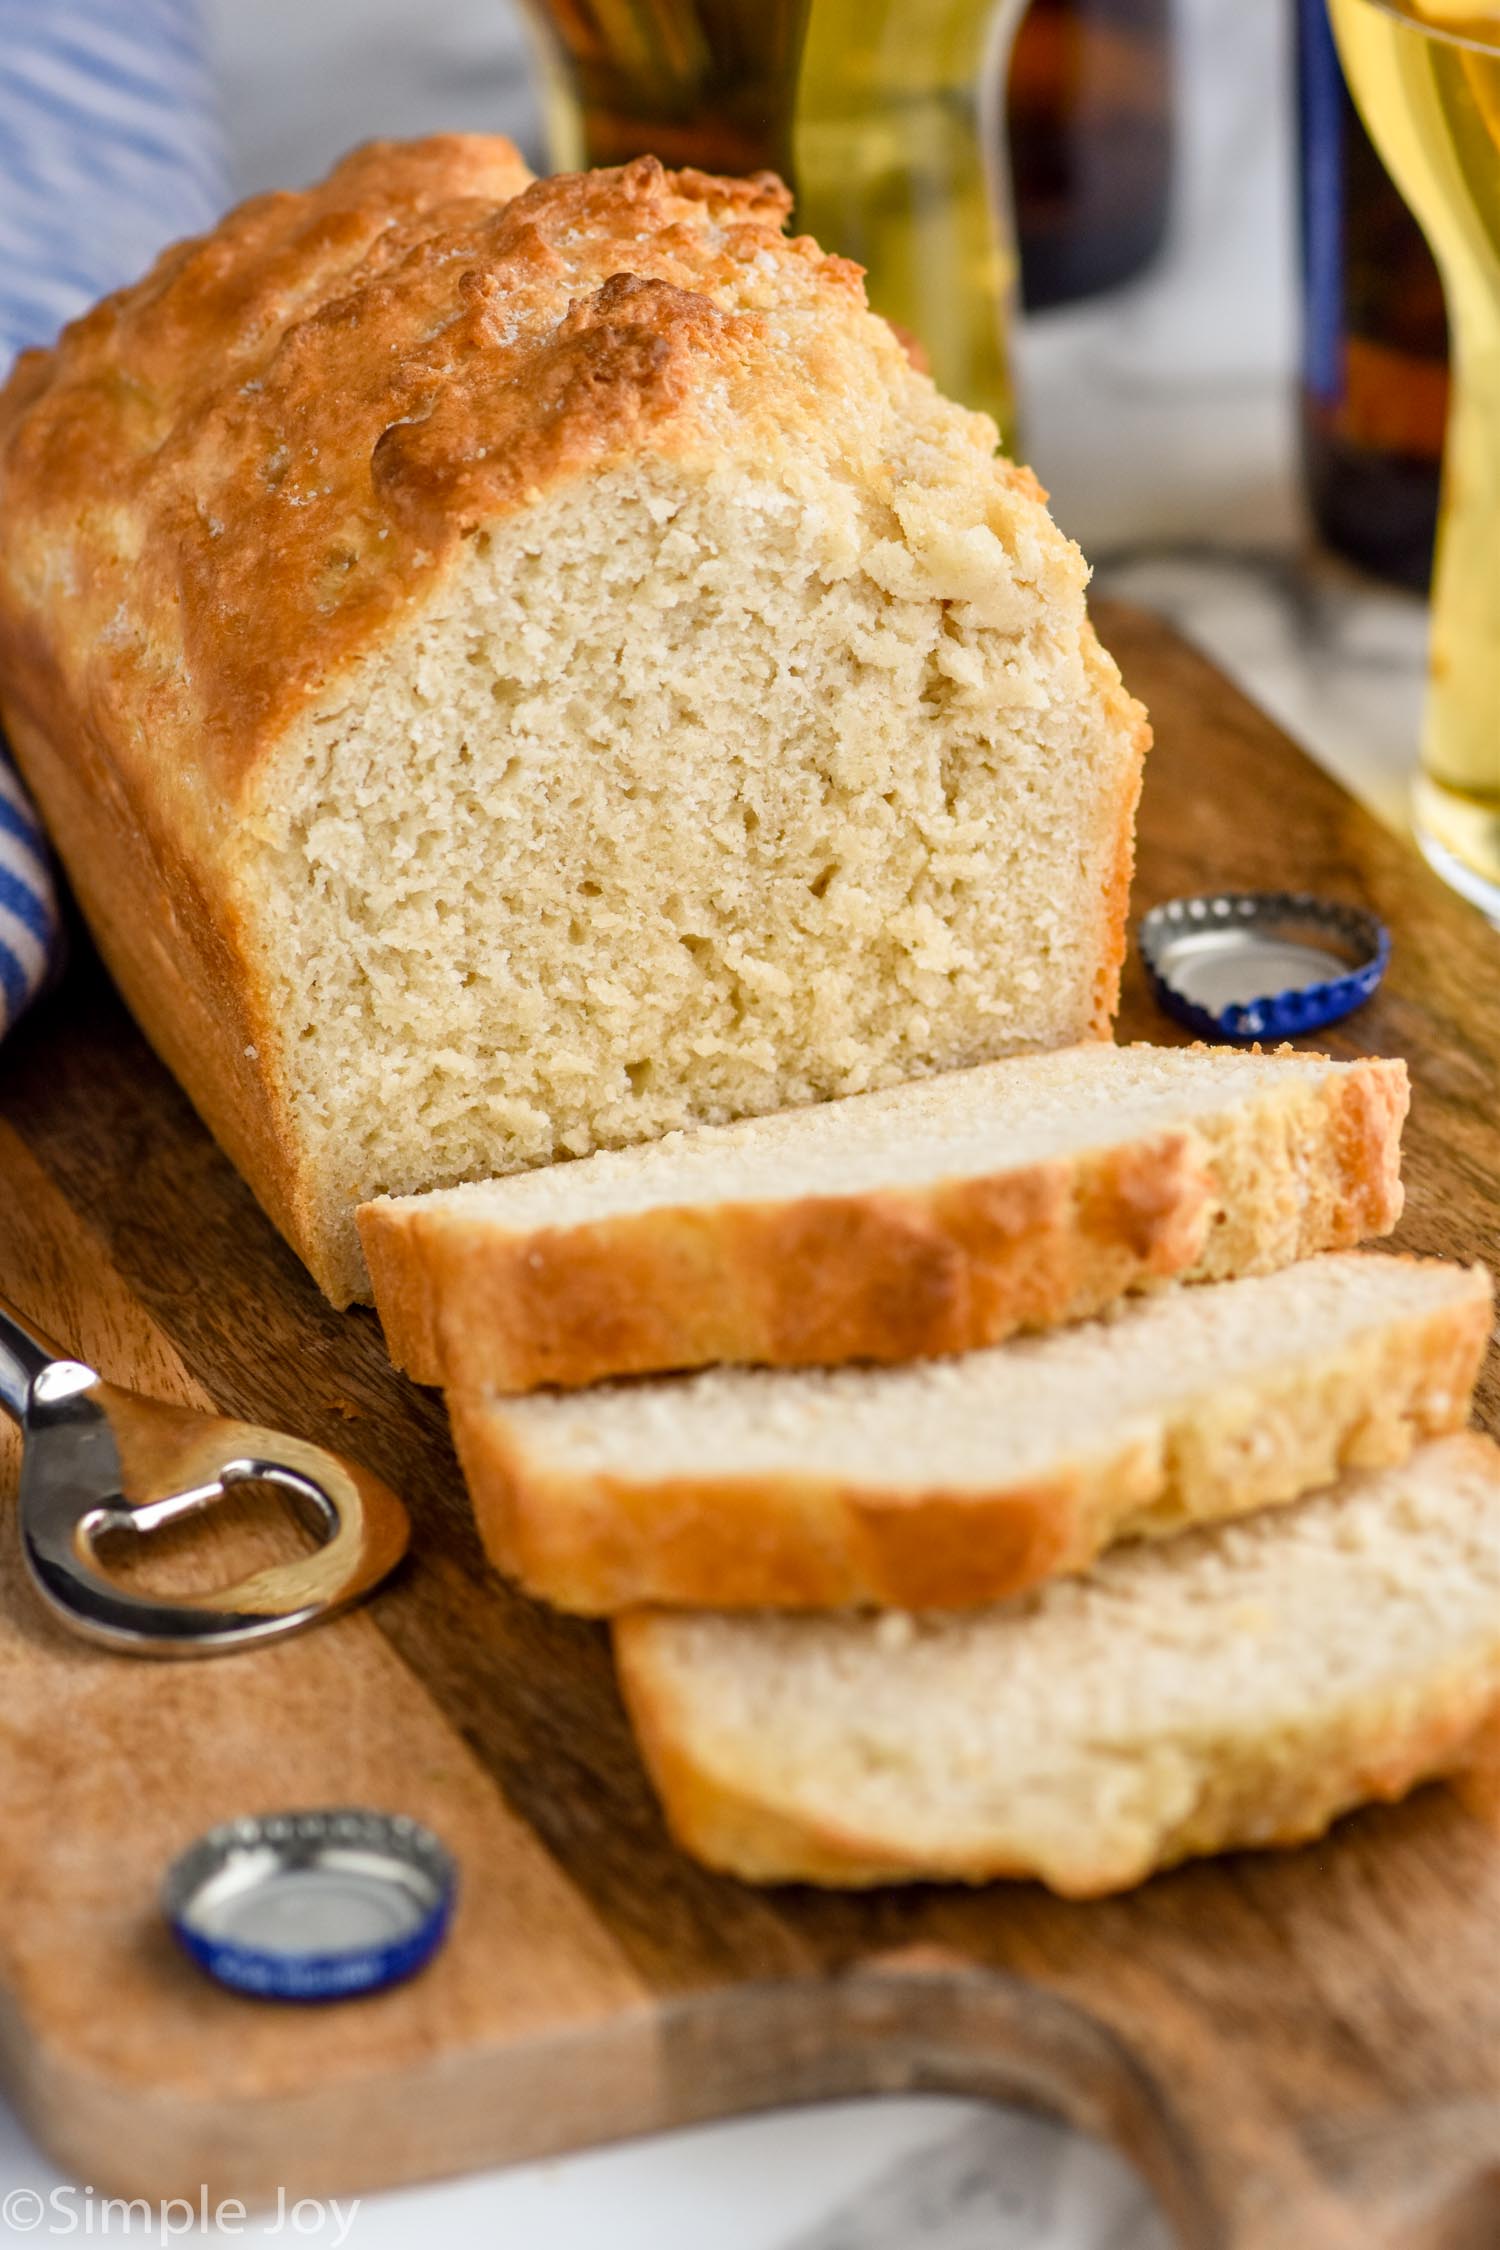 Deep South Dish: Extra Large White Loaf Bread